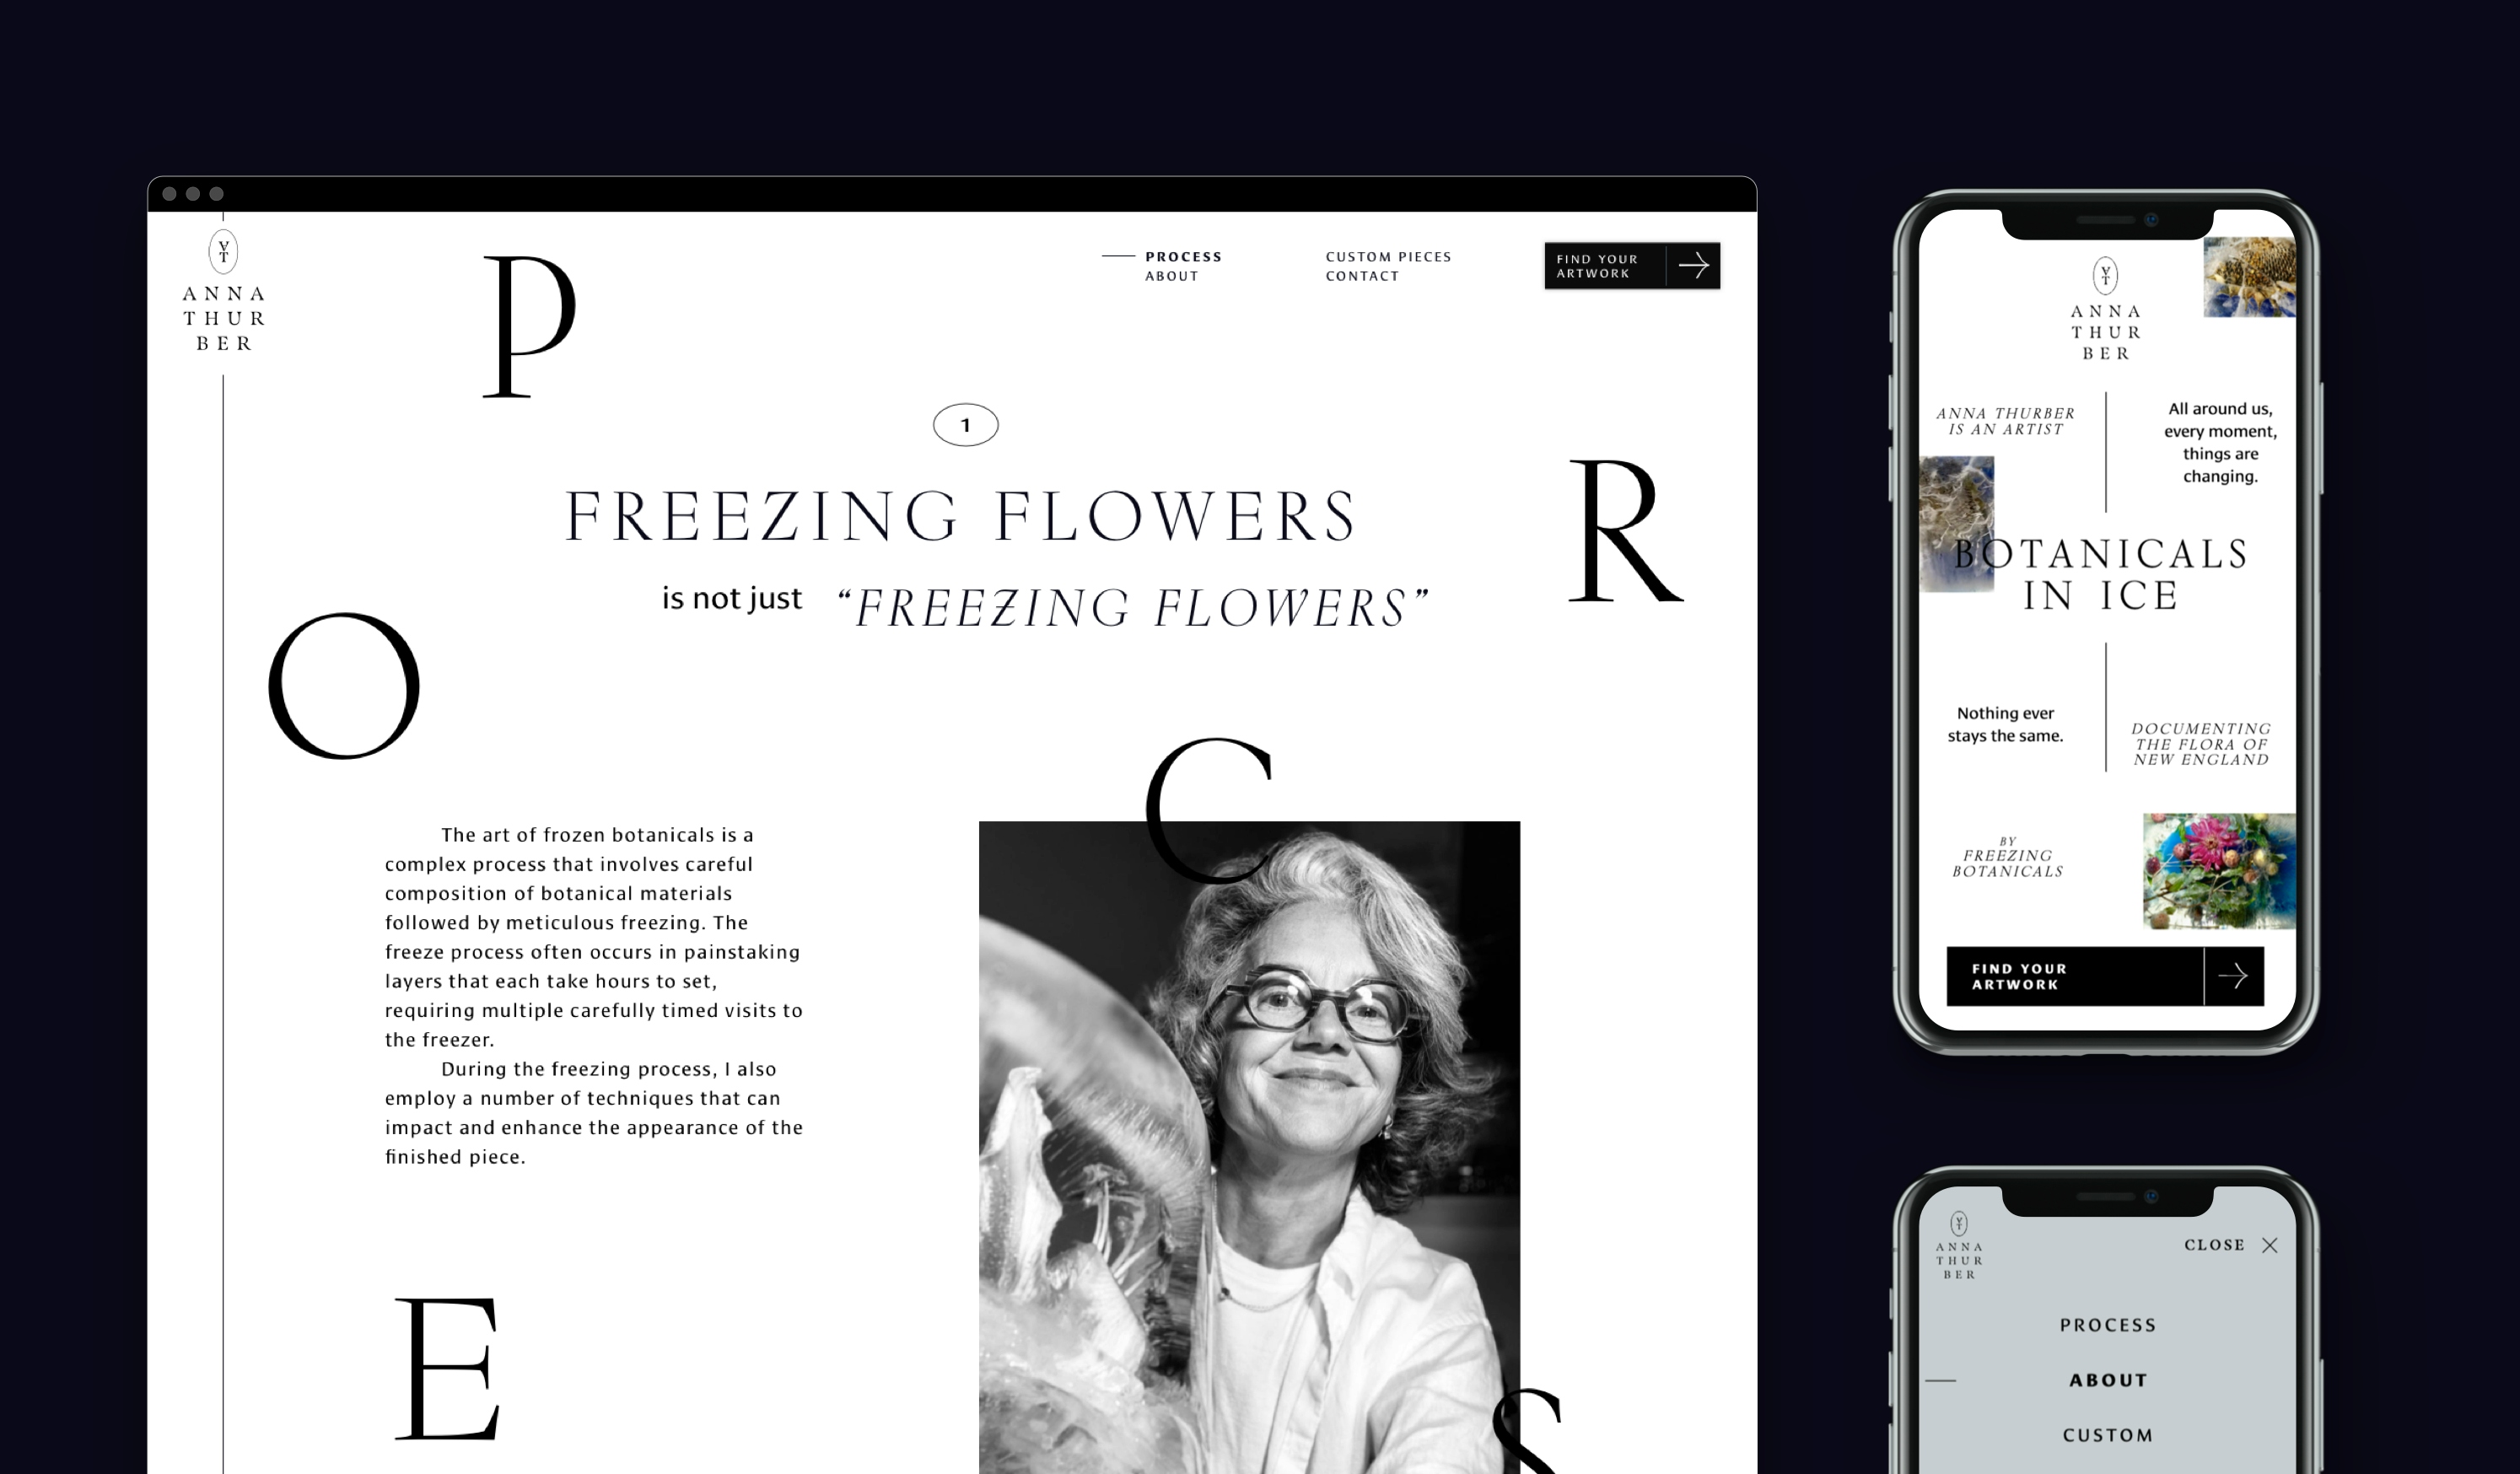 A screenshot of a webpage is on the left hand side of the image with a picture of Anna Thurber and a quote “Freezing Flowers is not just freezing flowers”. There are also some paragraphs. There is a mobile phone featuring the “Botanicals in Ice” page and the top of another phone sits underneath.